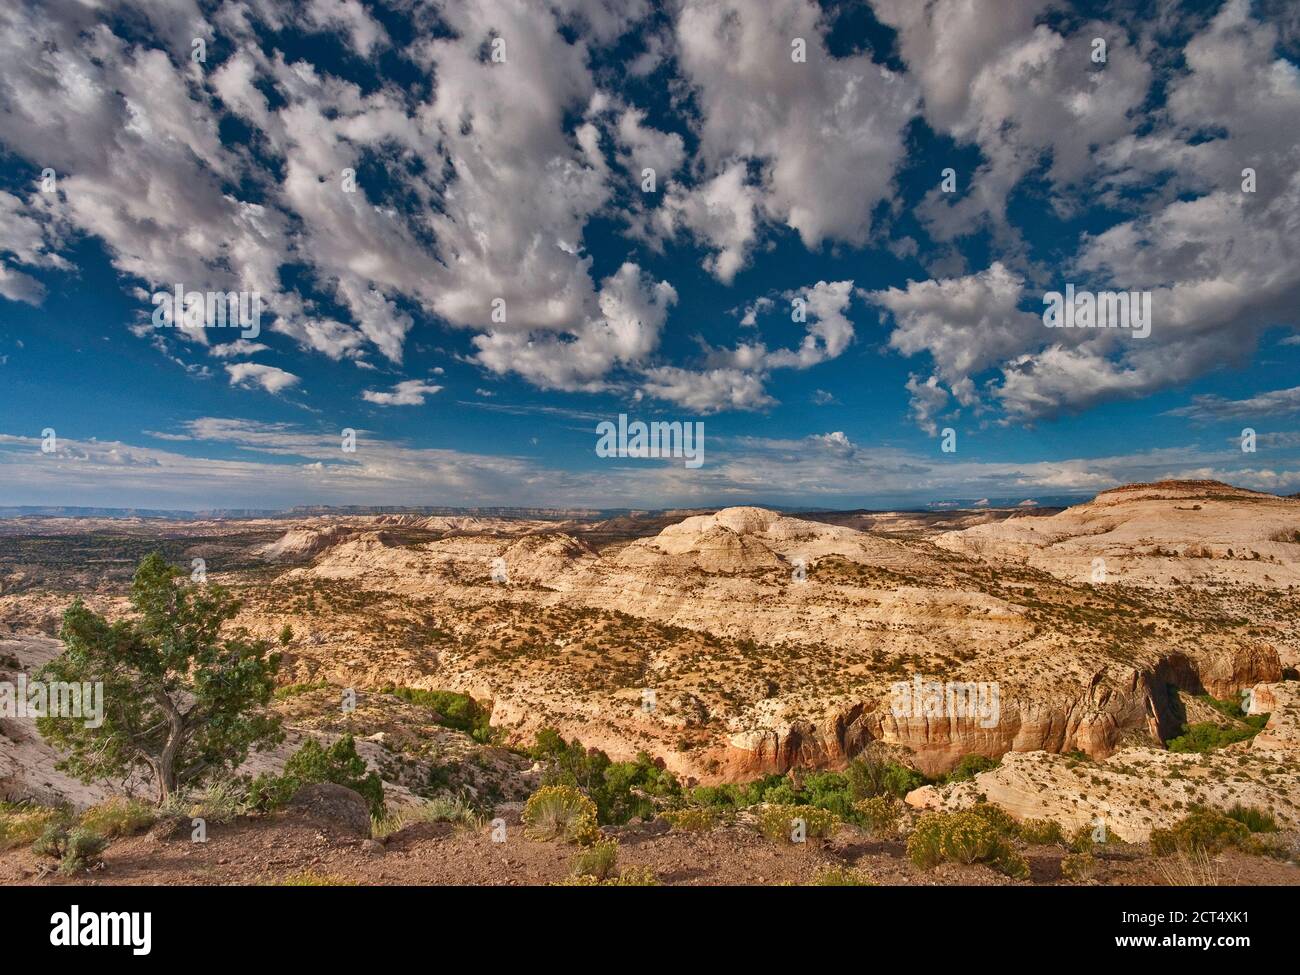 Calf Creek area, view from road following The Hogback at Grand Staircase Escalante National Monument, Colorado Plateau, Utah, USA Stock Photo